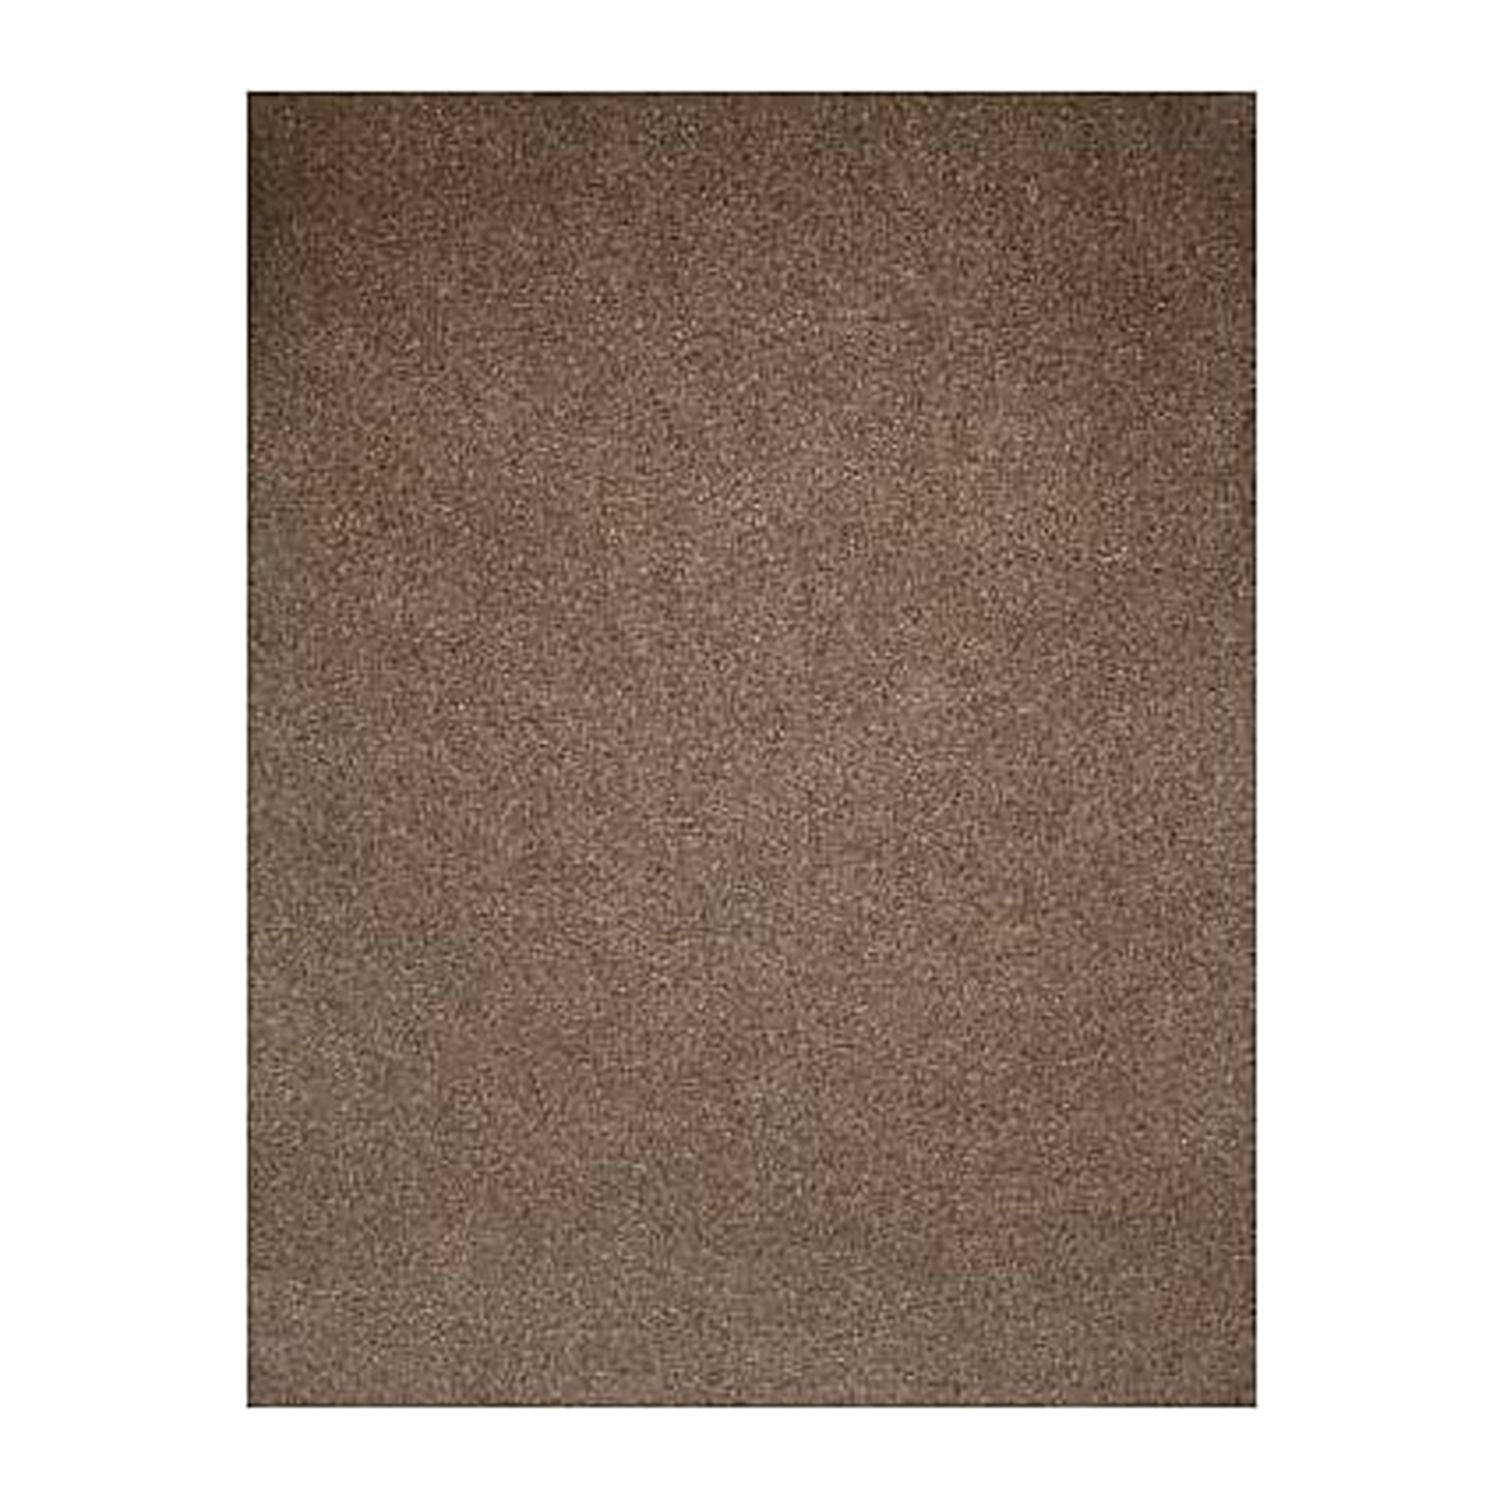 11 x 17 Cardstock - White Linen (50 Qty.)